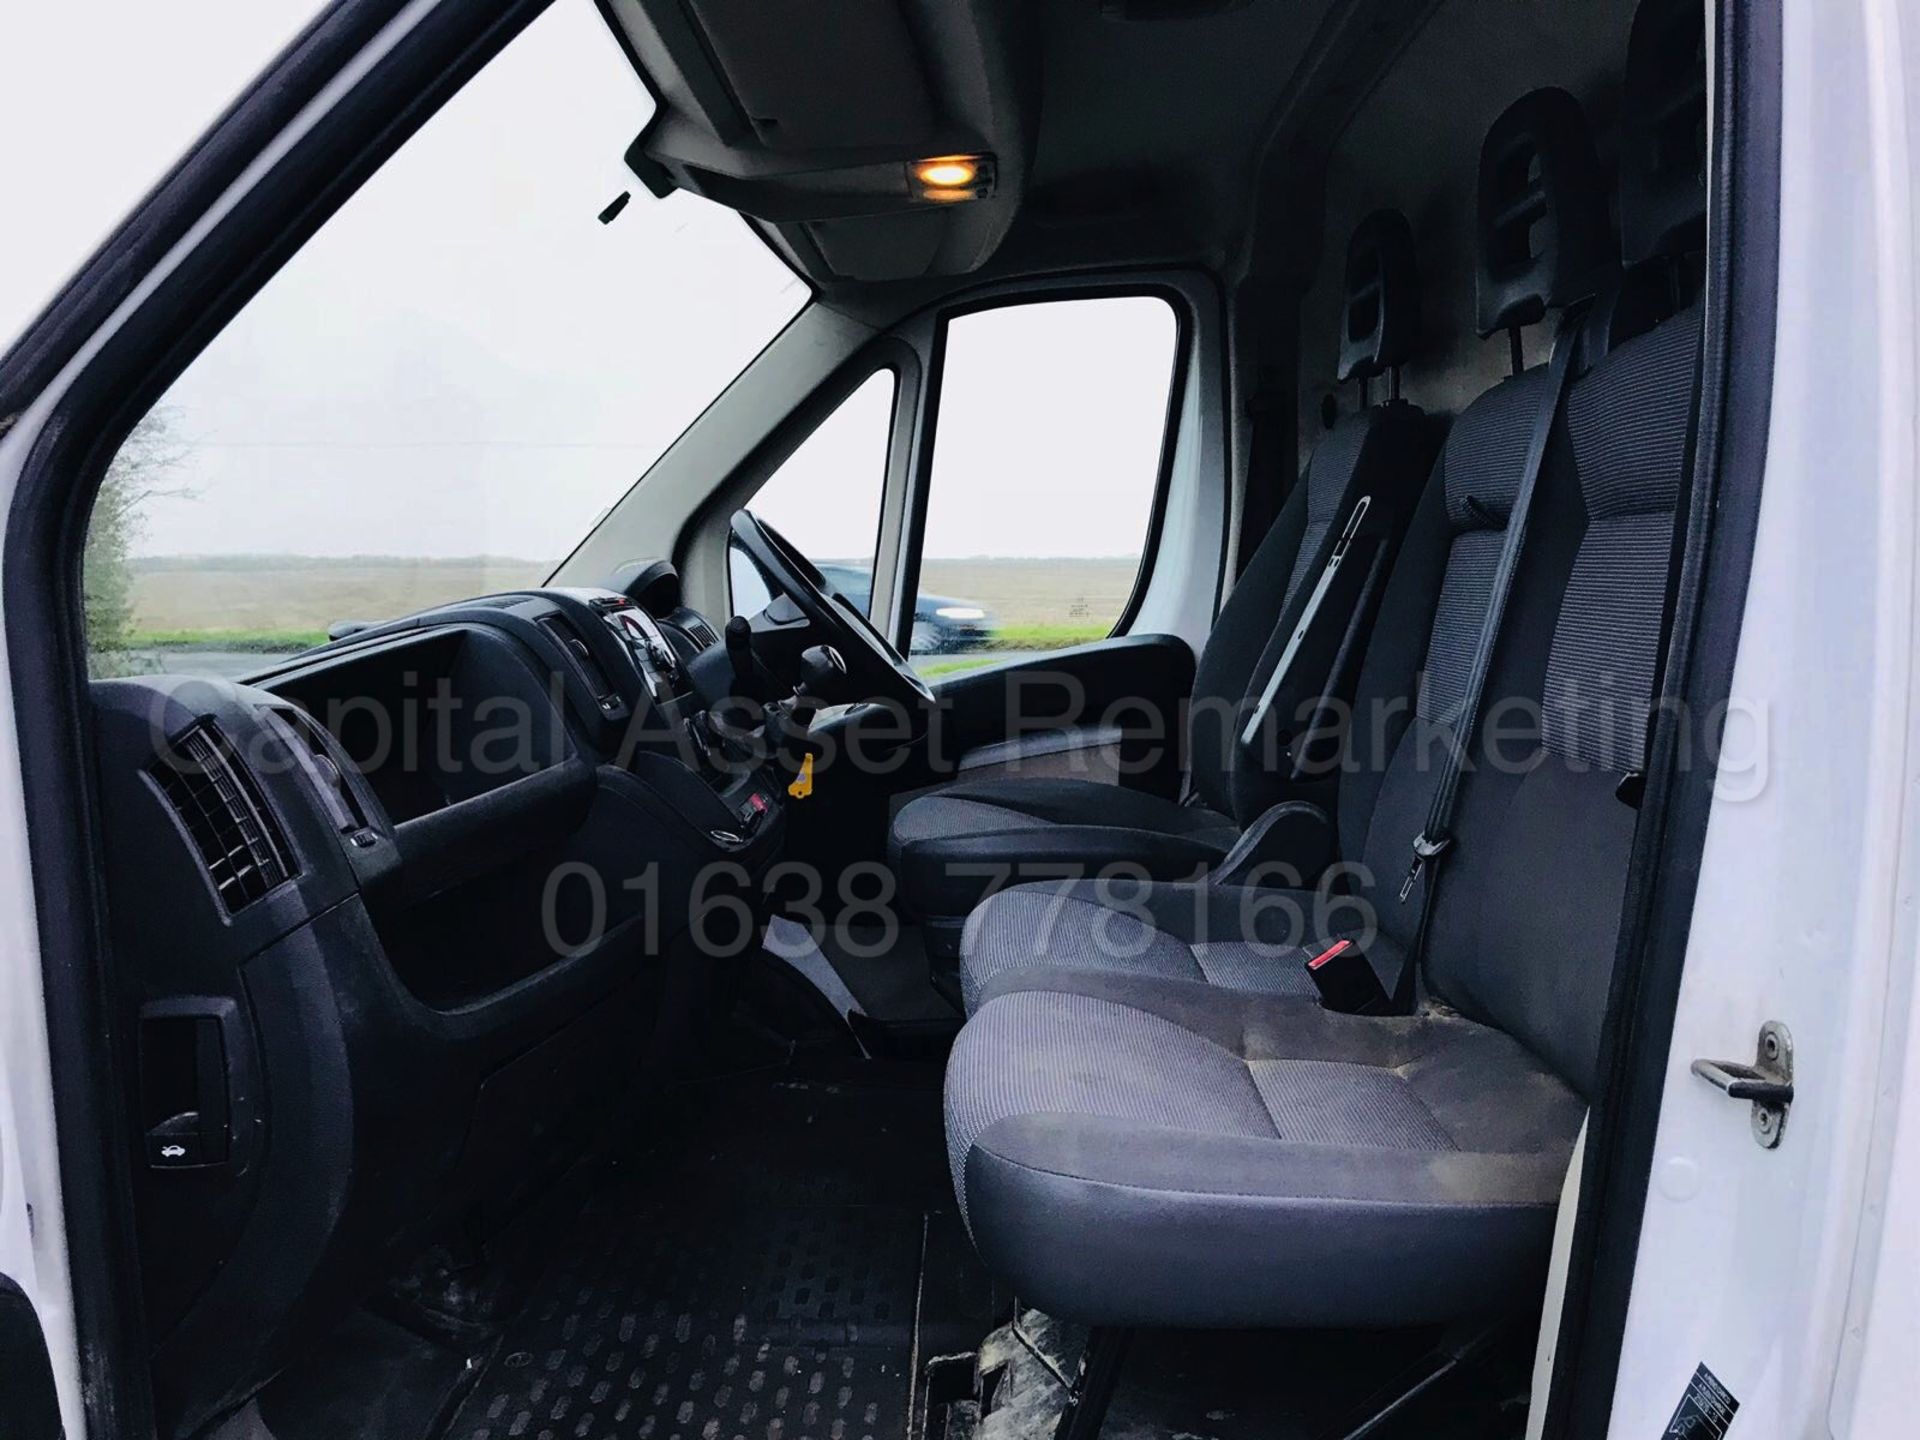 (On Sale) PEUGEOT BOXER 335 LWB HI-ROOF (2014) '2.2 HDI - 130 BHP- 6 SPEED' (1 OWNER - FULL HISTORY) - Image 10 of 19